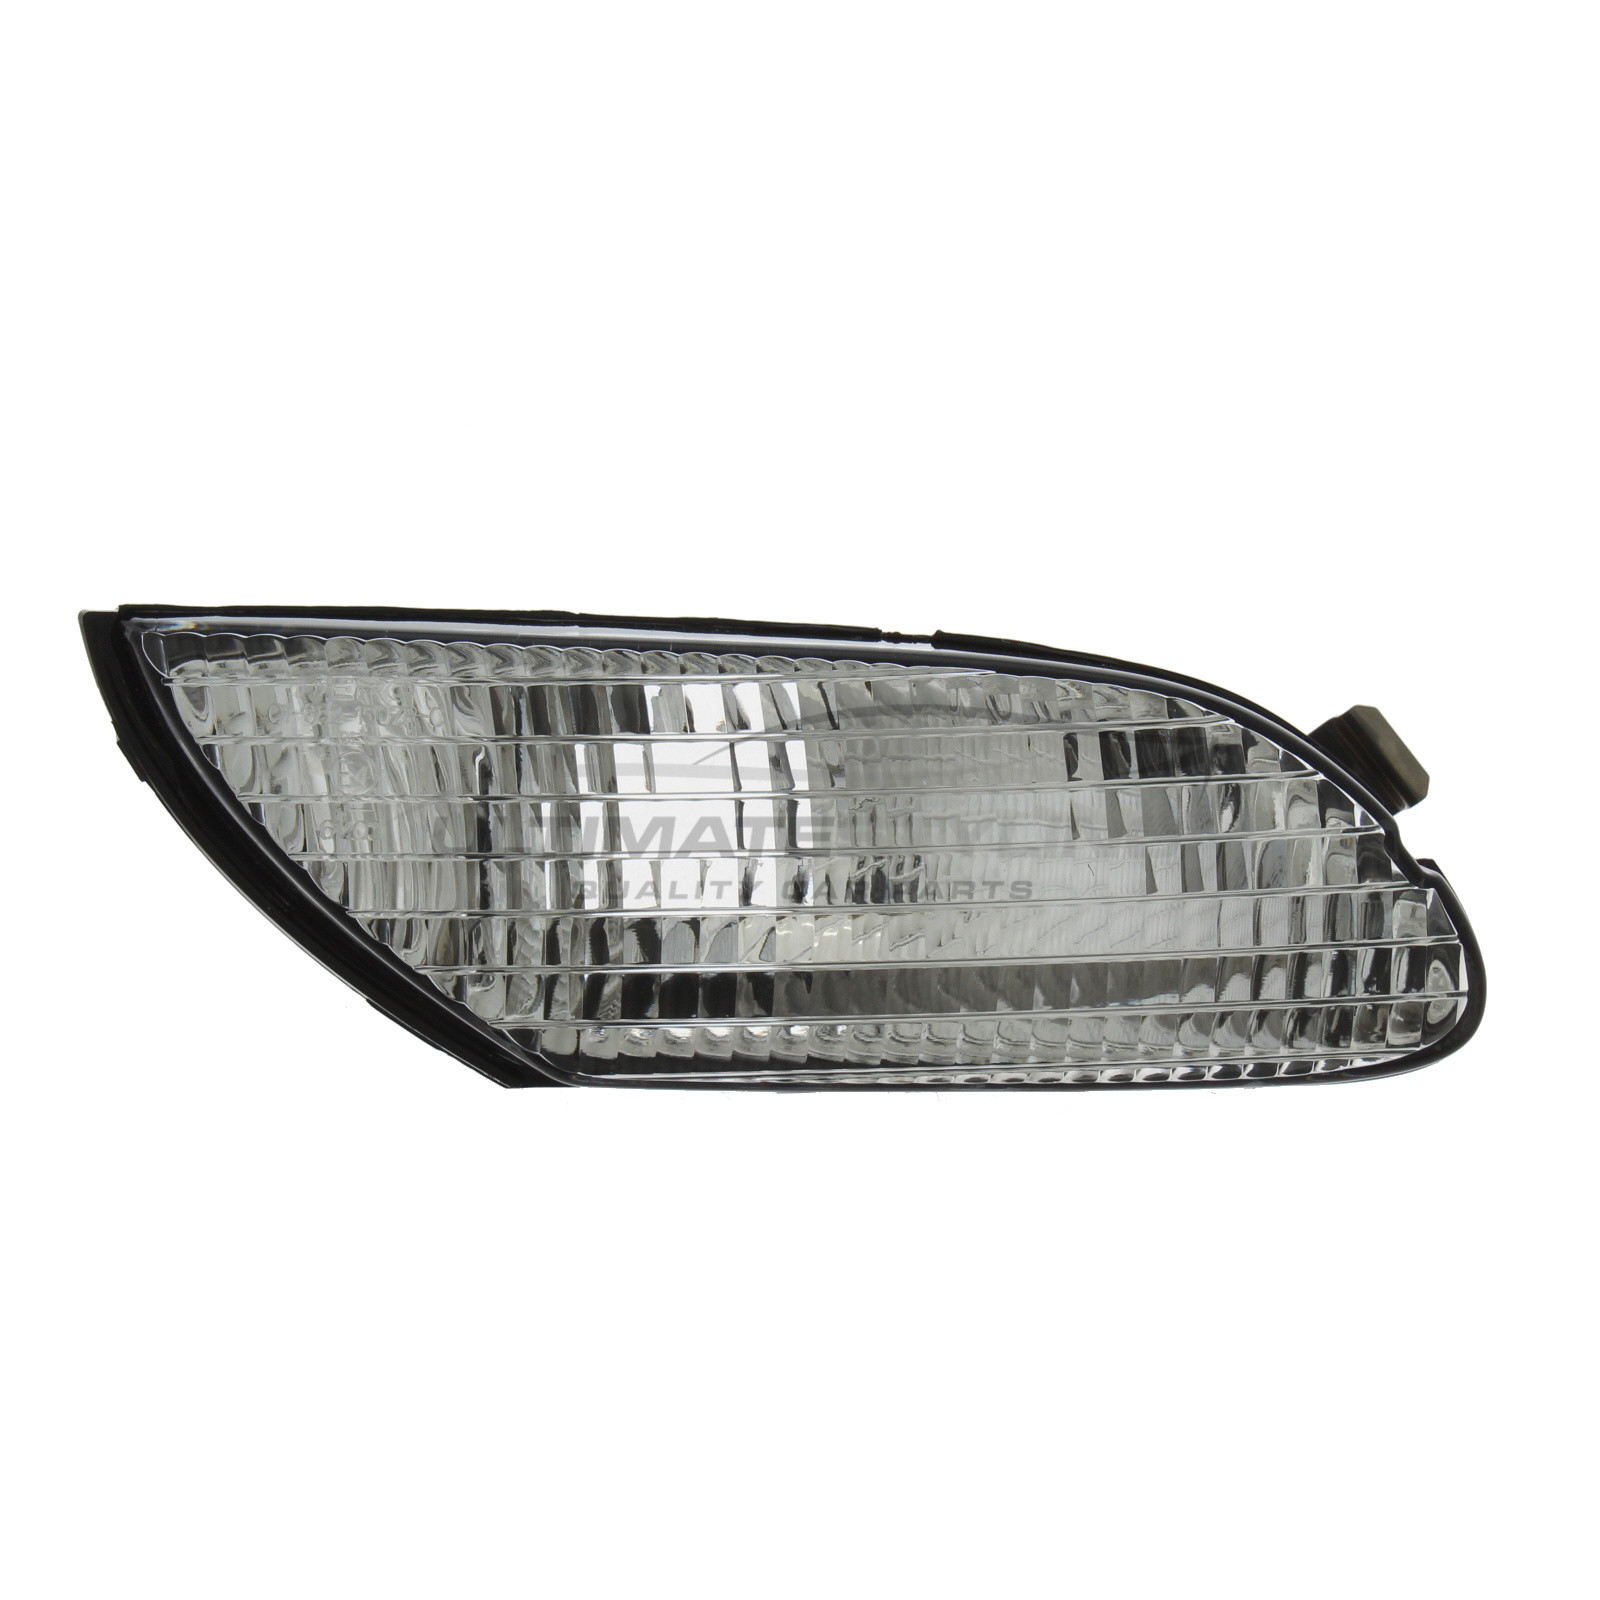 Rover 25 Series 1999-2006 / Rover Commerce 2003-2006 / Rover MG Express 2001-2006 / Rover MGZR 2001-2006 Clear Front Indicator Excludes Bulb Holder - Drivers Side (RH)